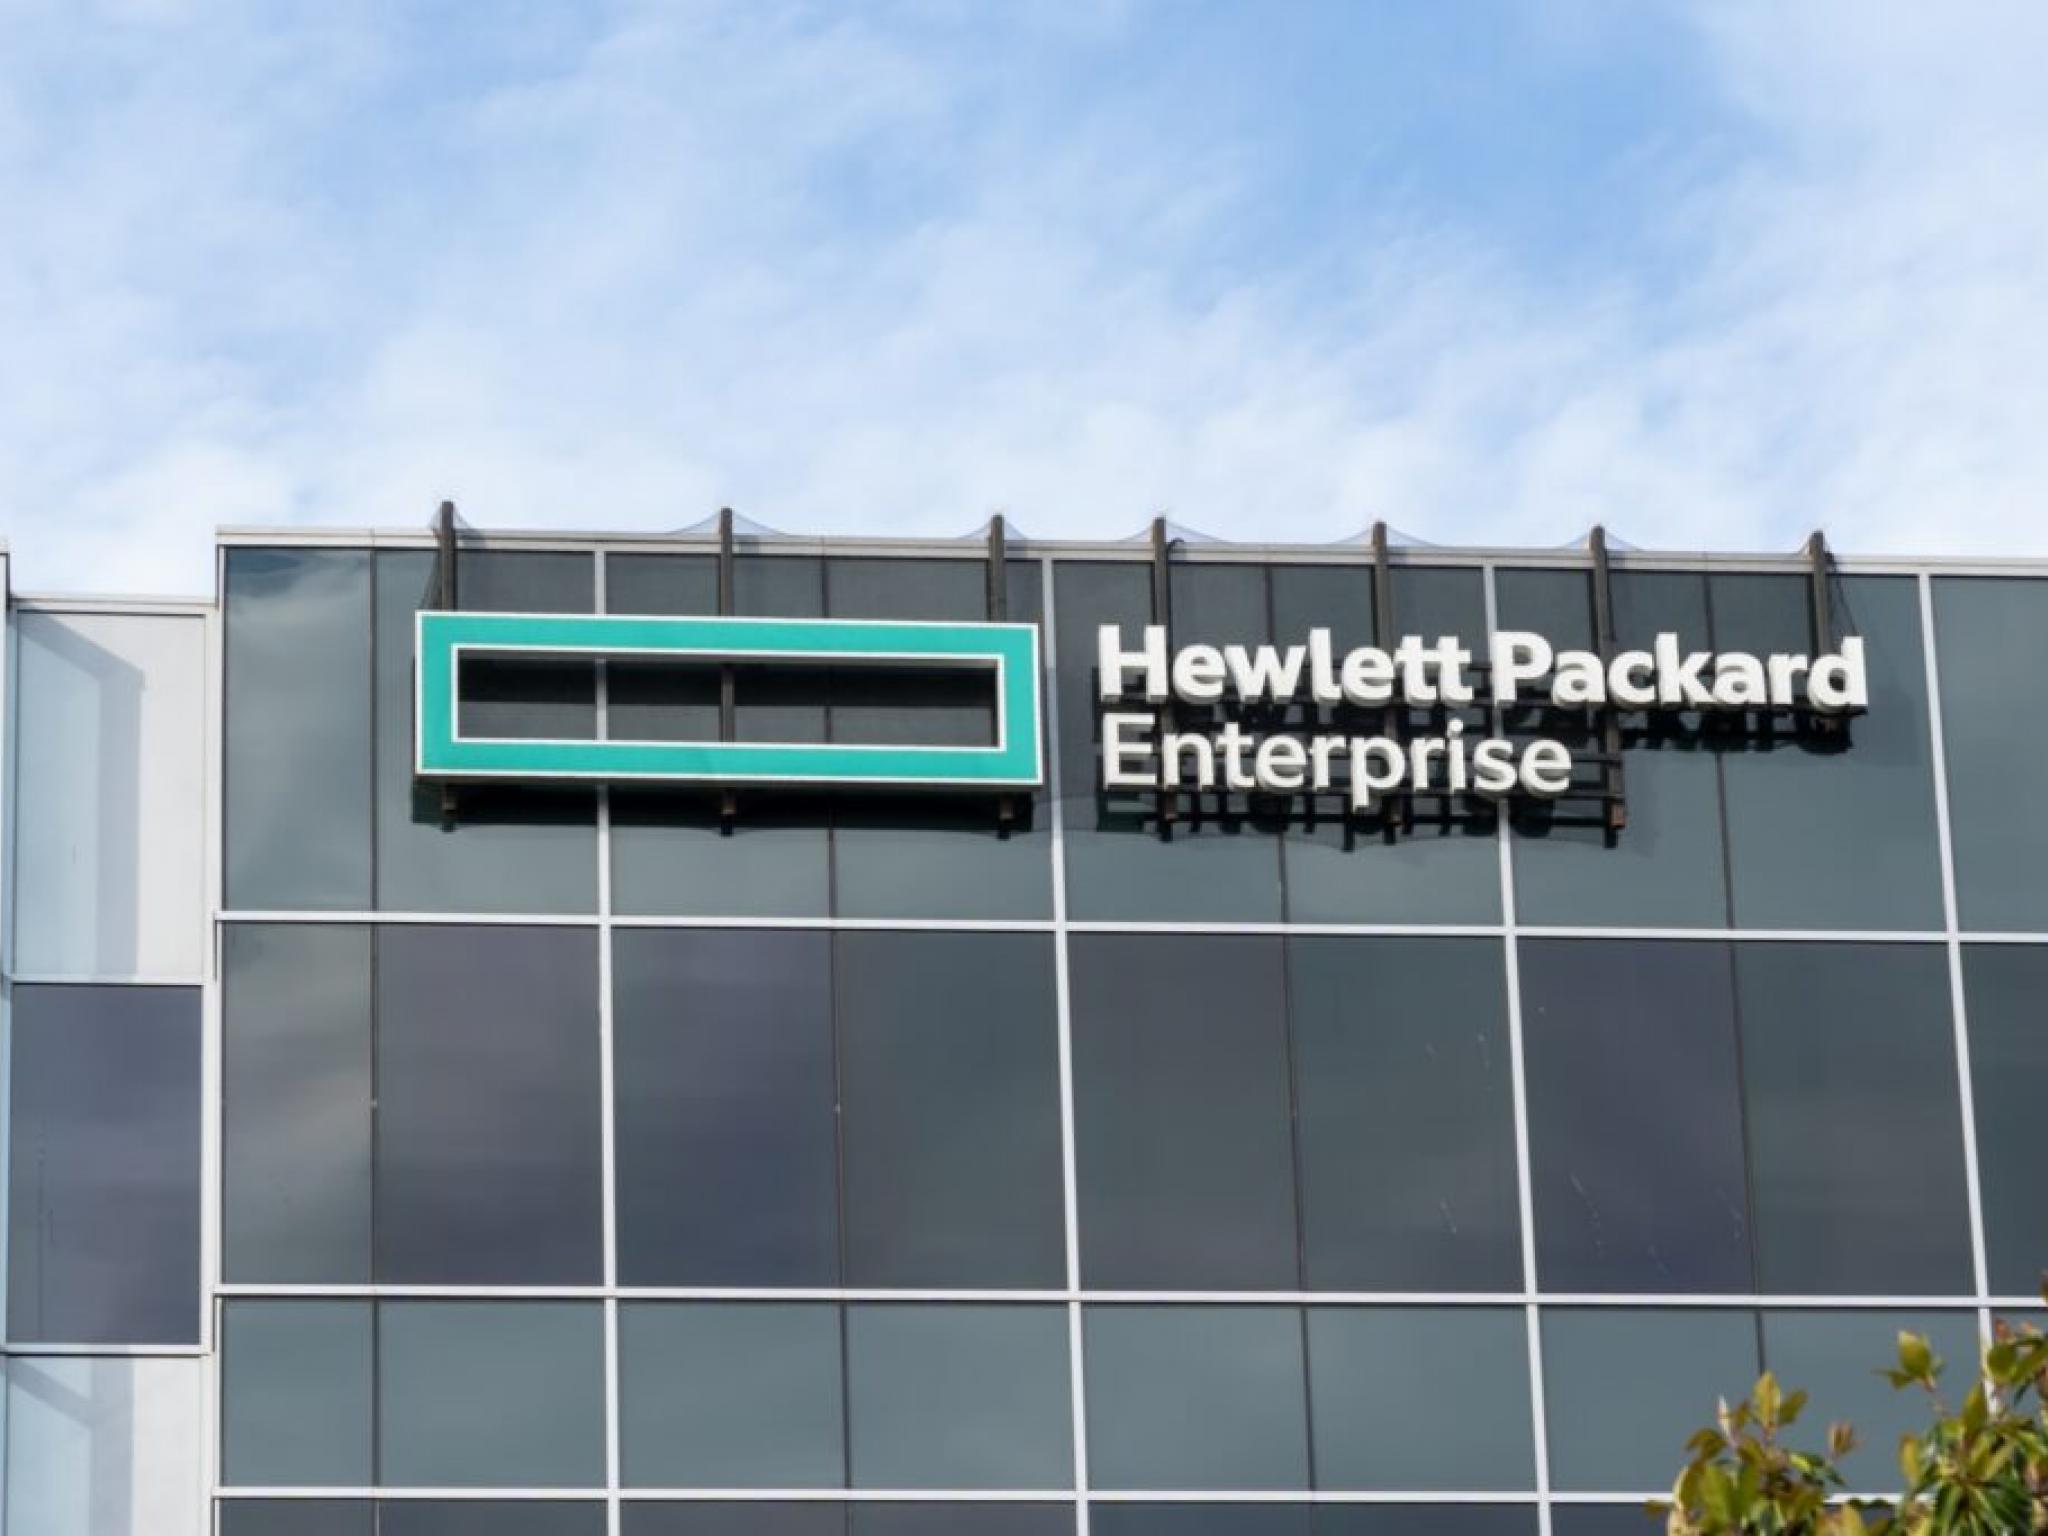  hewlett-packard-positioned-for-growth-golden-cross-sighted-government-relationships-will-come-into-play 